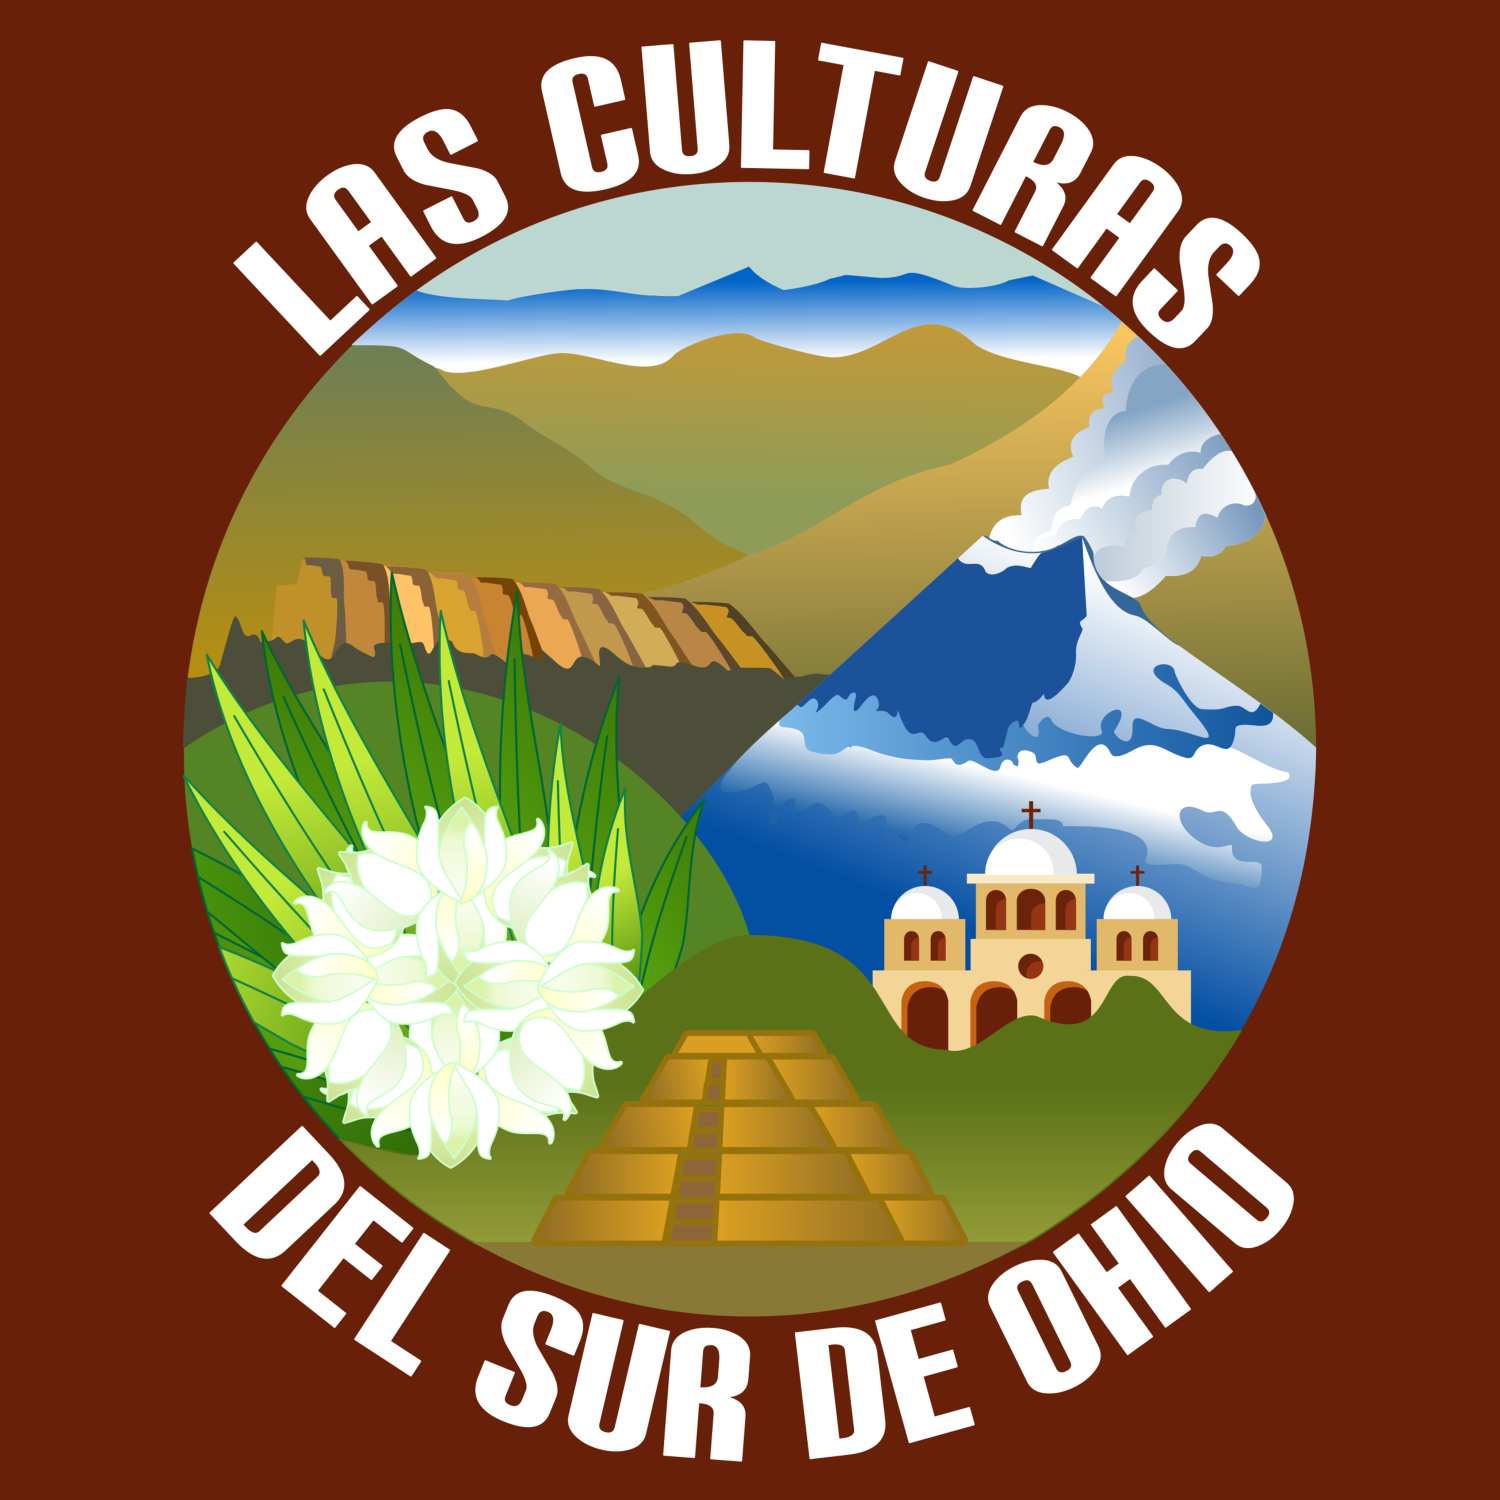 podcast logo, which features latin american and appalachian imagery